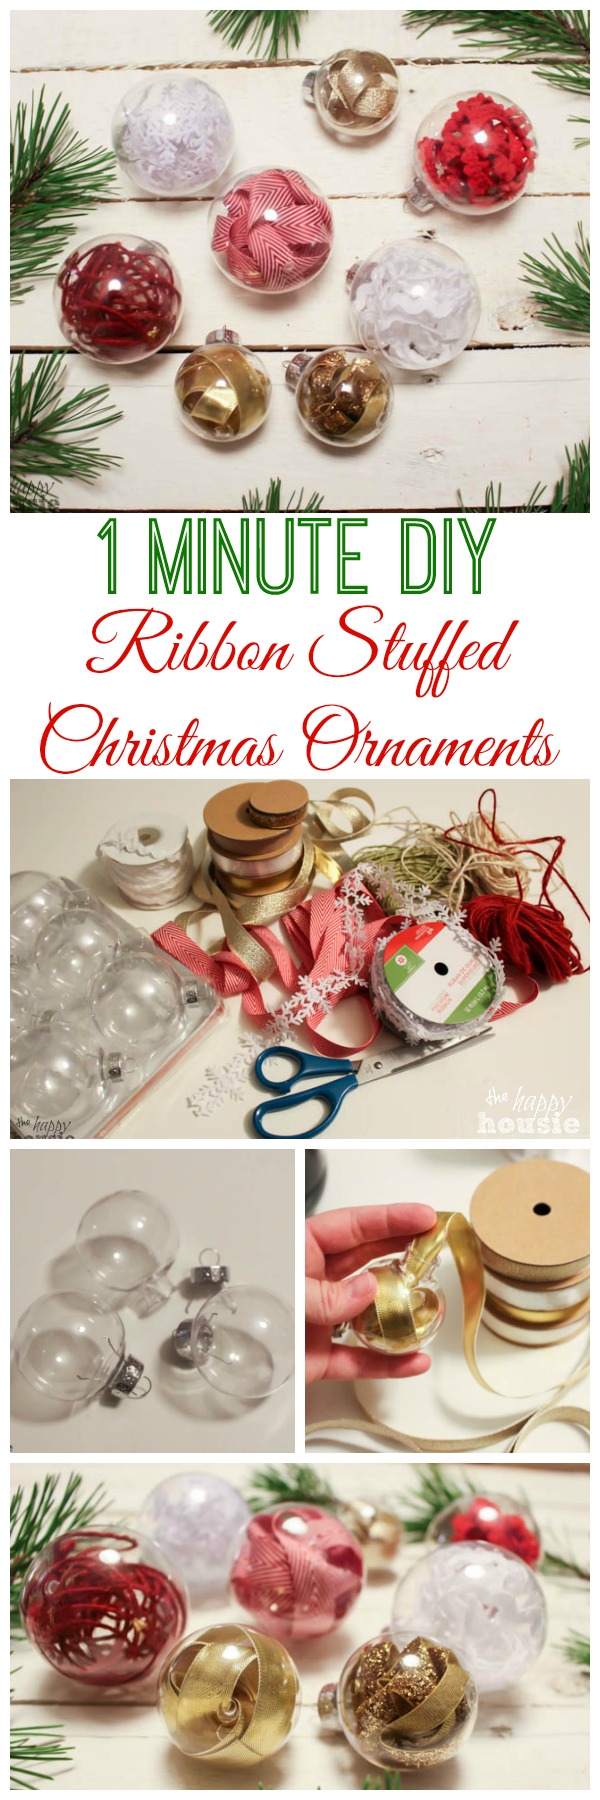 Beautiful, simple, and fast -a tutorial for these 1 minute DIY ribbon stuffed Christmas ornaments at The Happy Housie